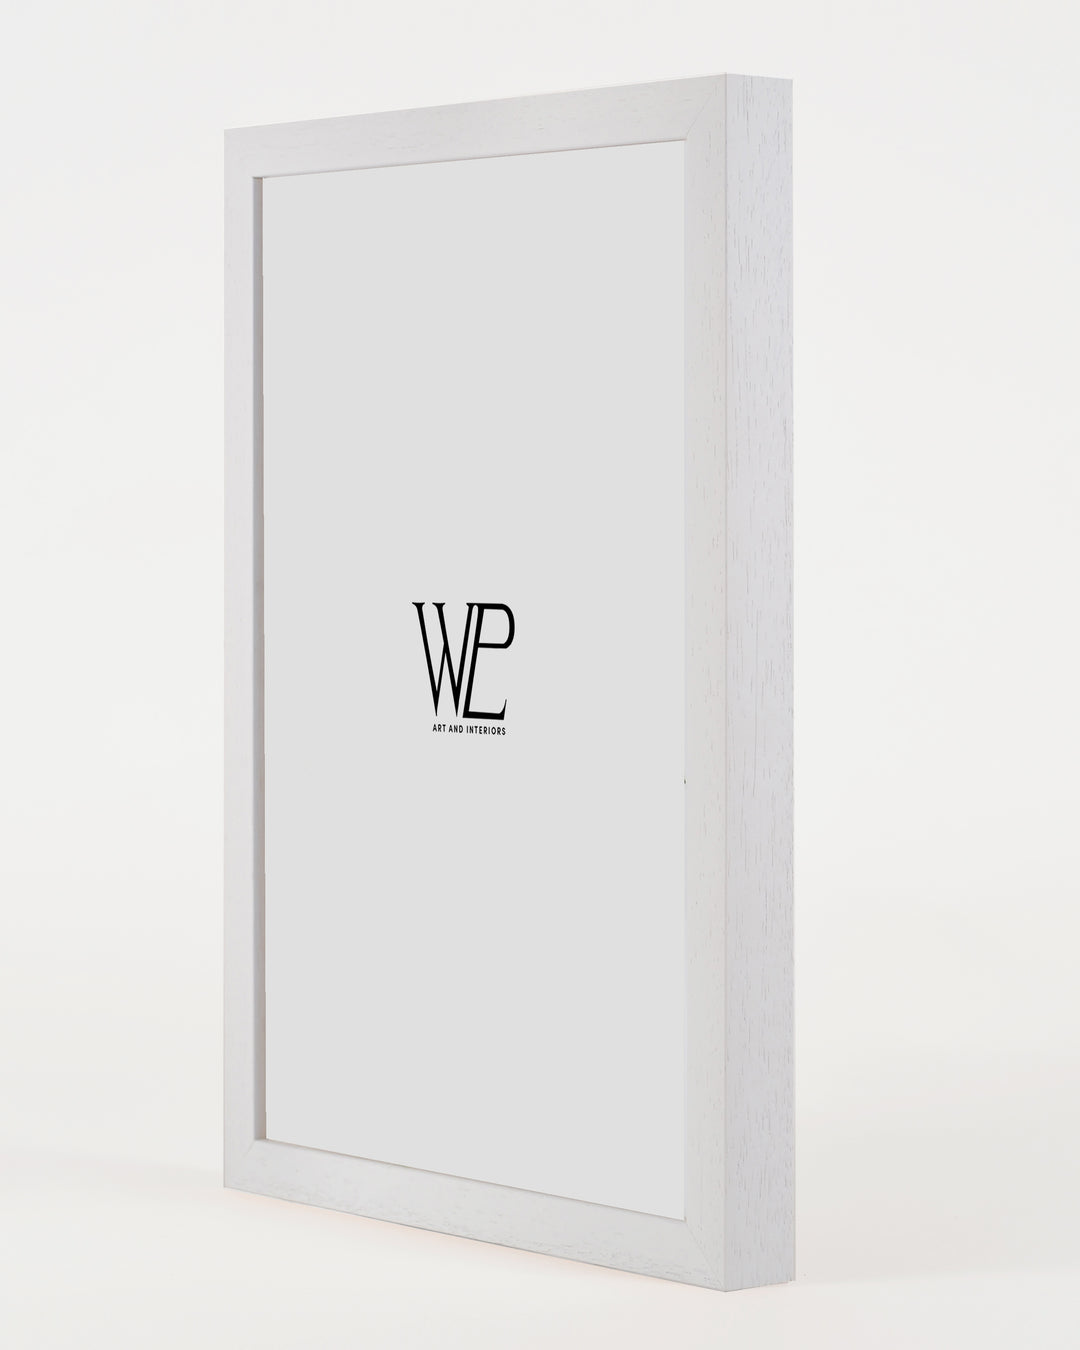 White Picture Frame (Wood Grain), A4 Size Photo Frame